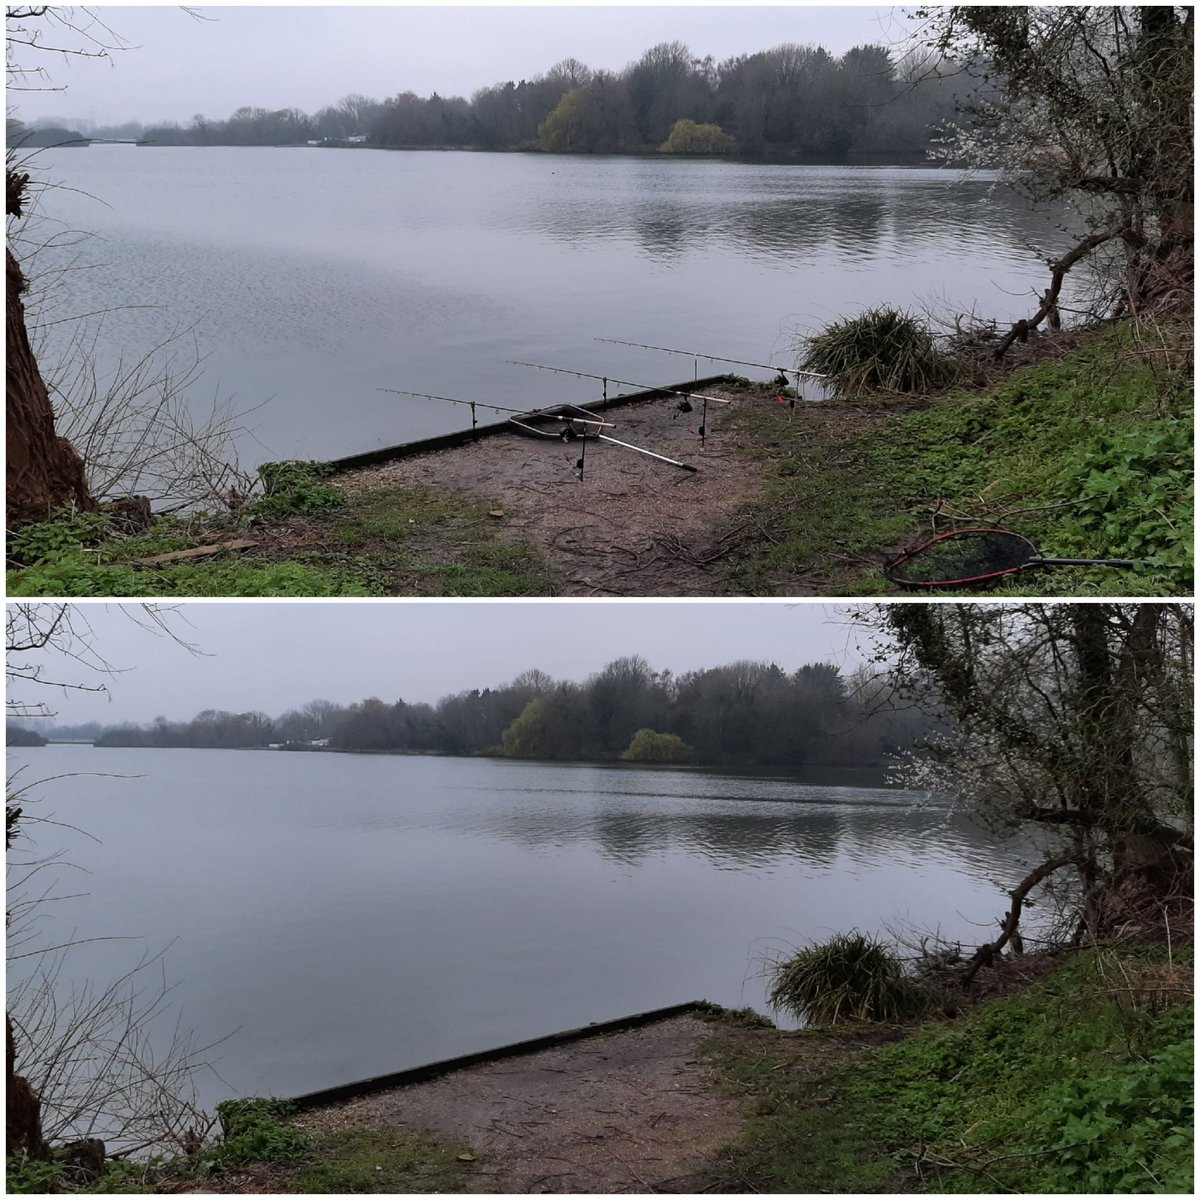 Nazeing Meads, its bleak,but last chance of piking for me,so here I am.
Sharing my swim with a Stoat,fantastic little creatures, but can't get a pic of the little bugger,,,